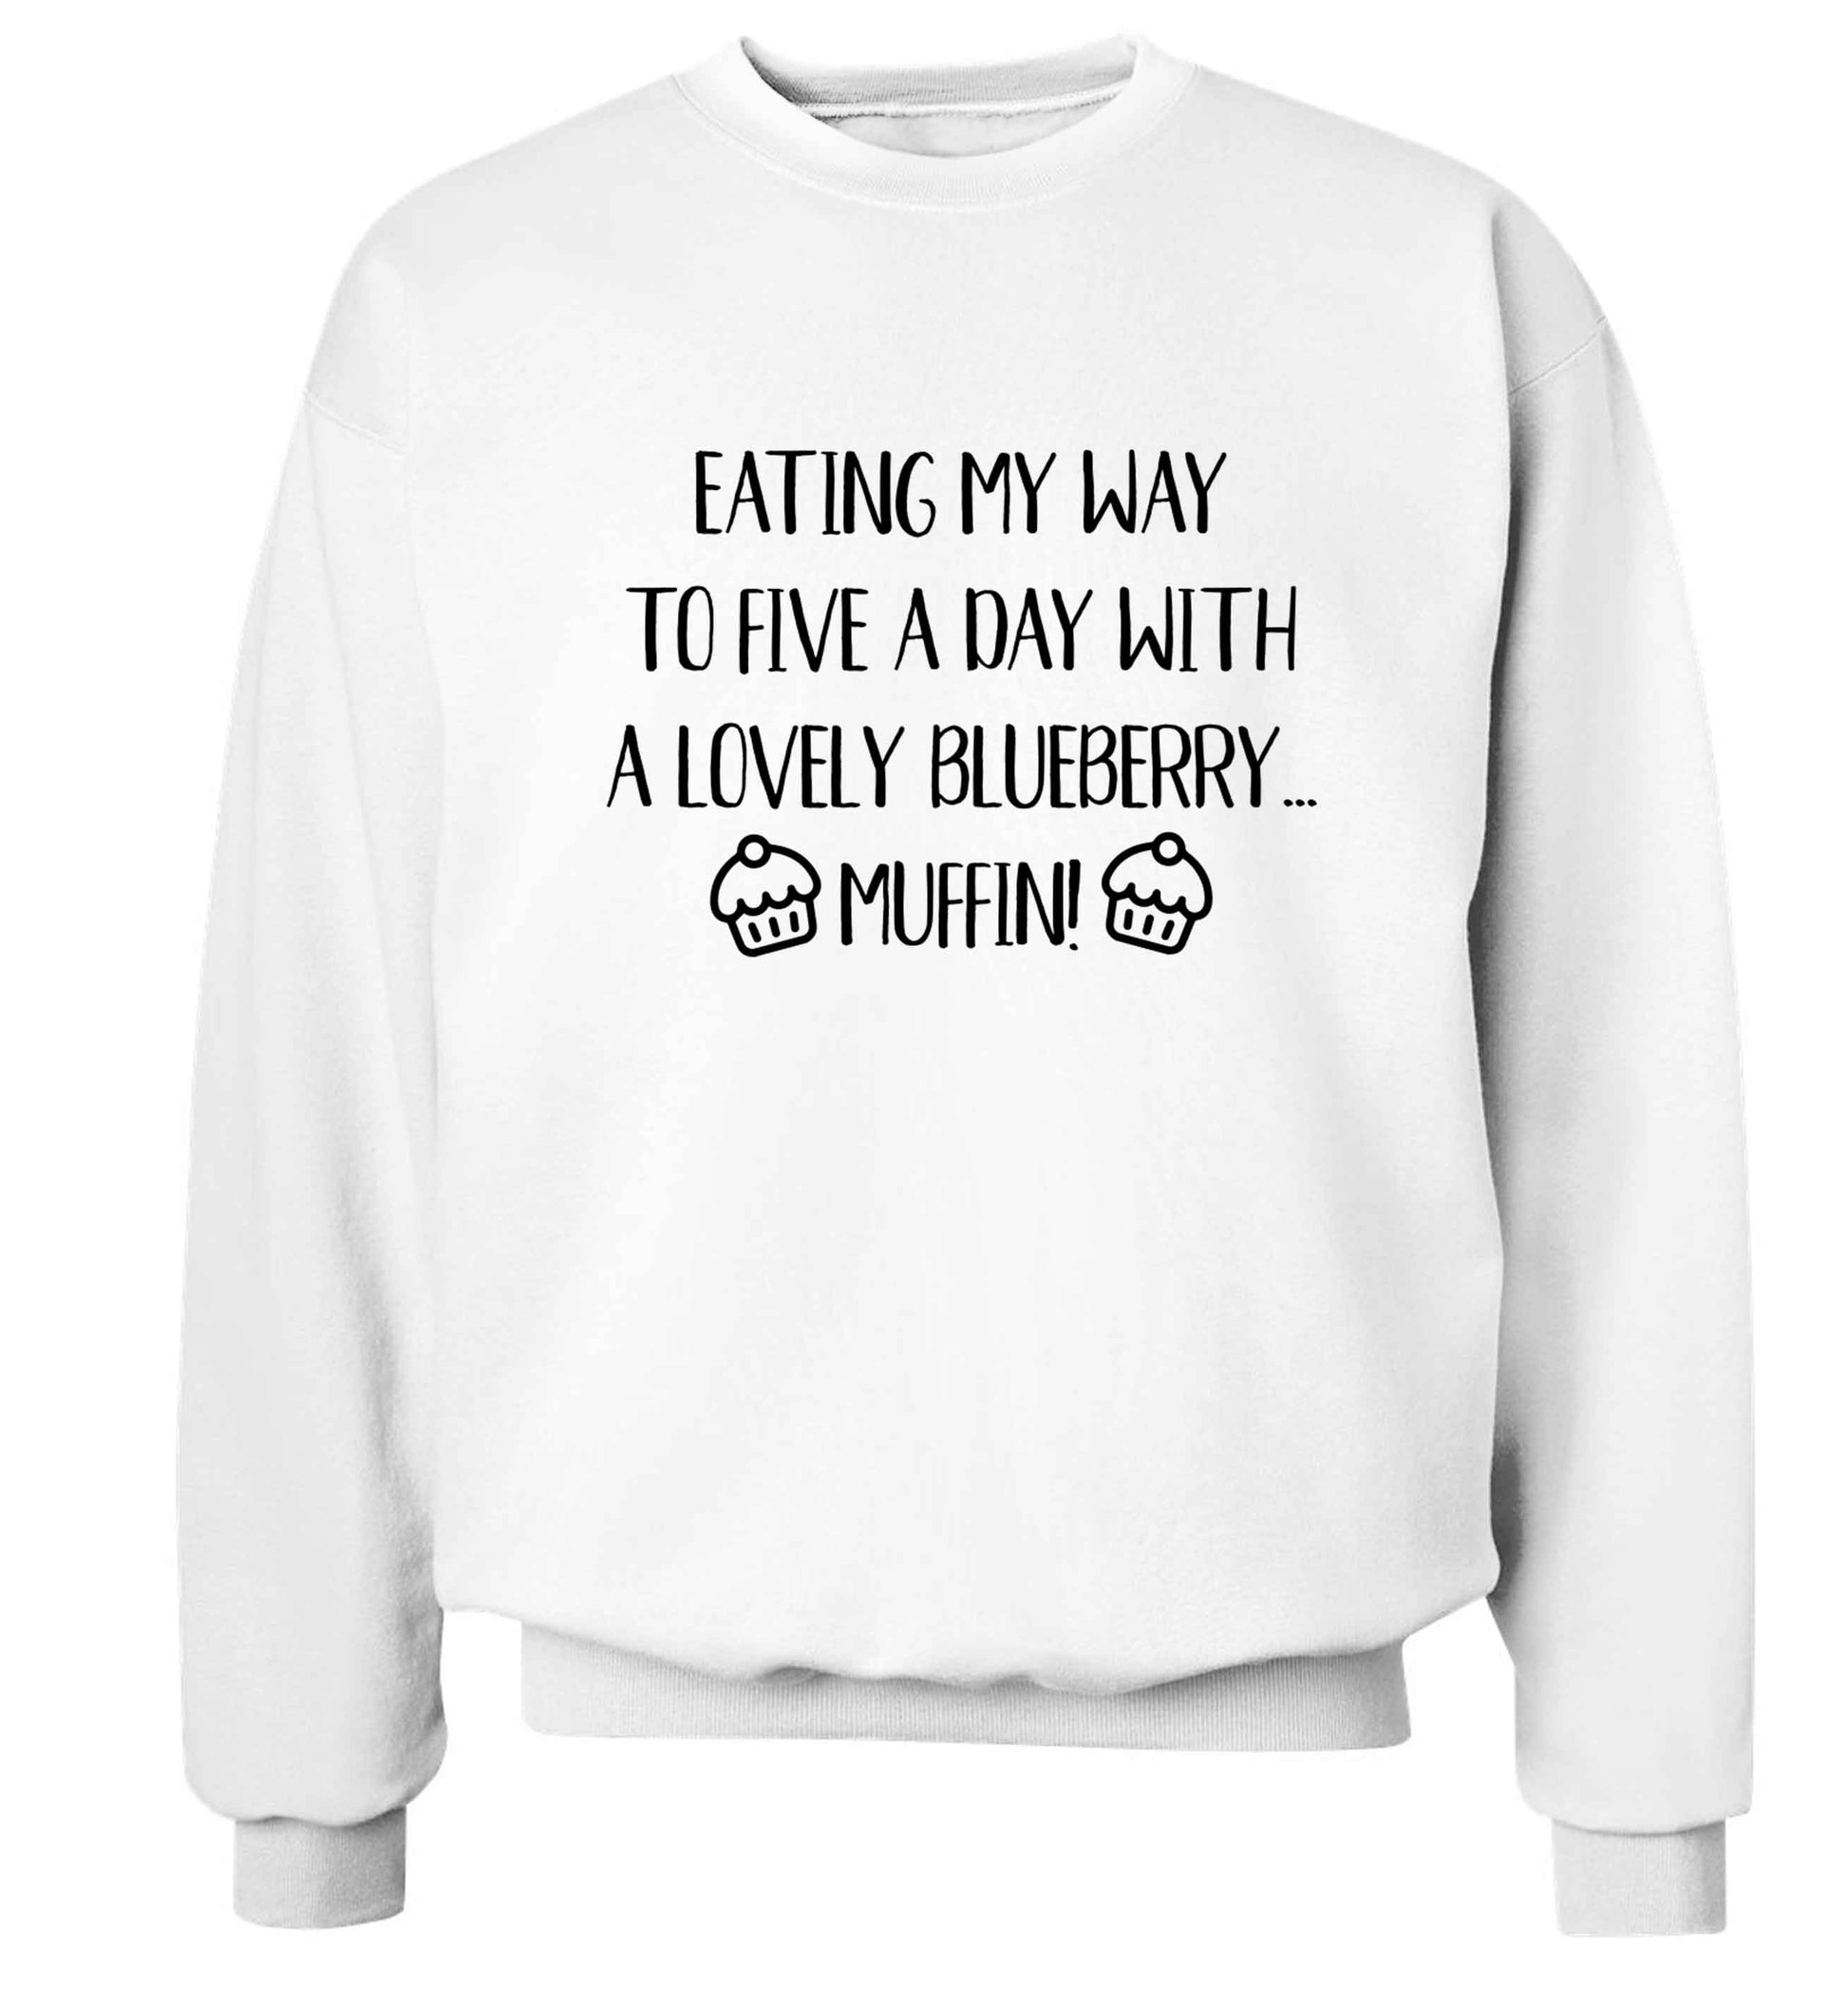 Eating my way to five a day with a lovely blueberry muffin Adult's unisex white Sweater 2XL